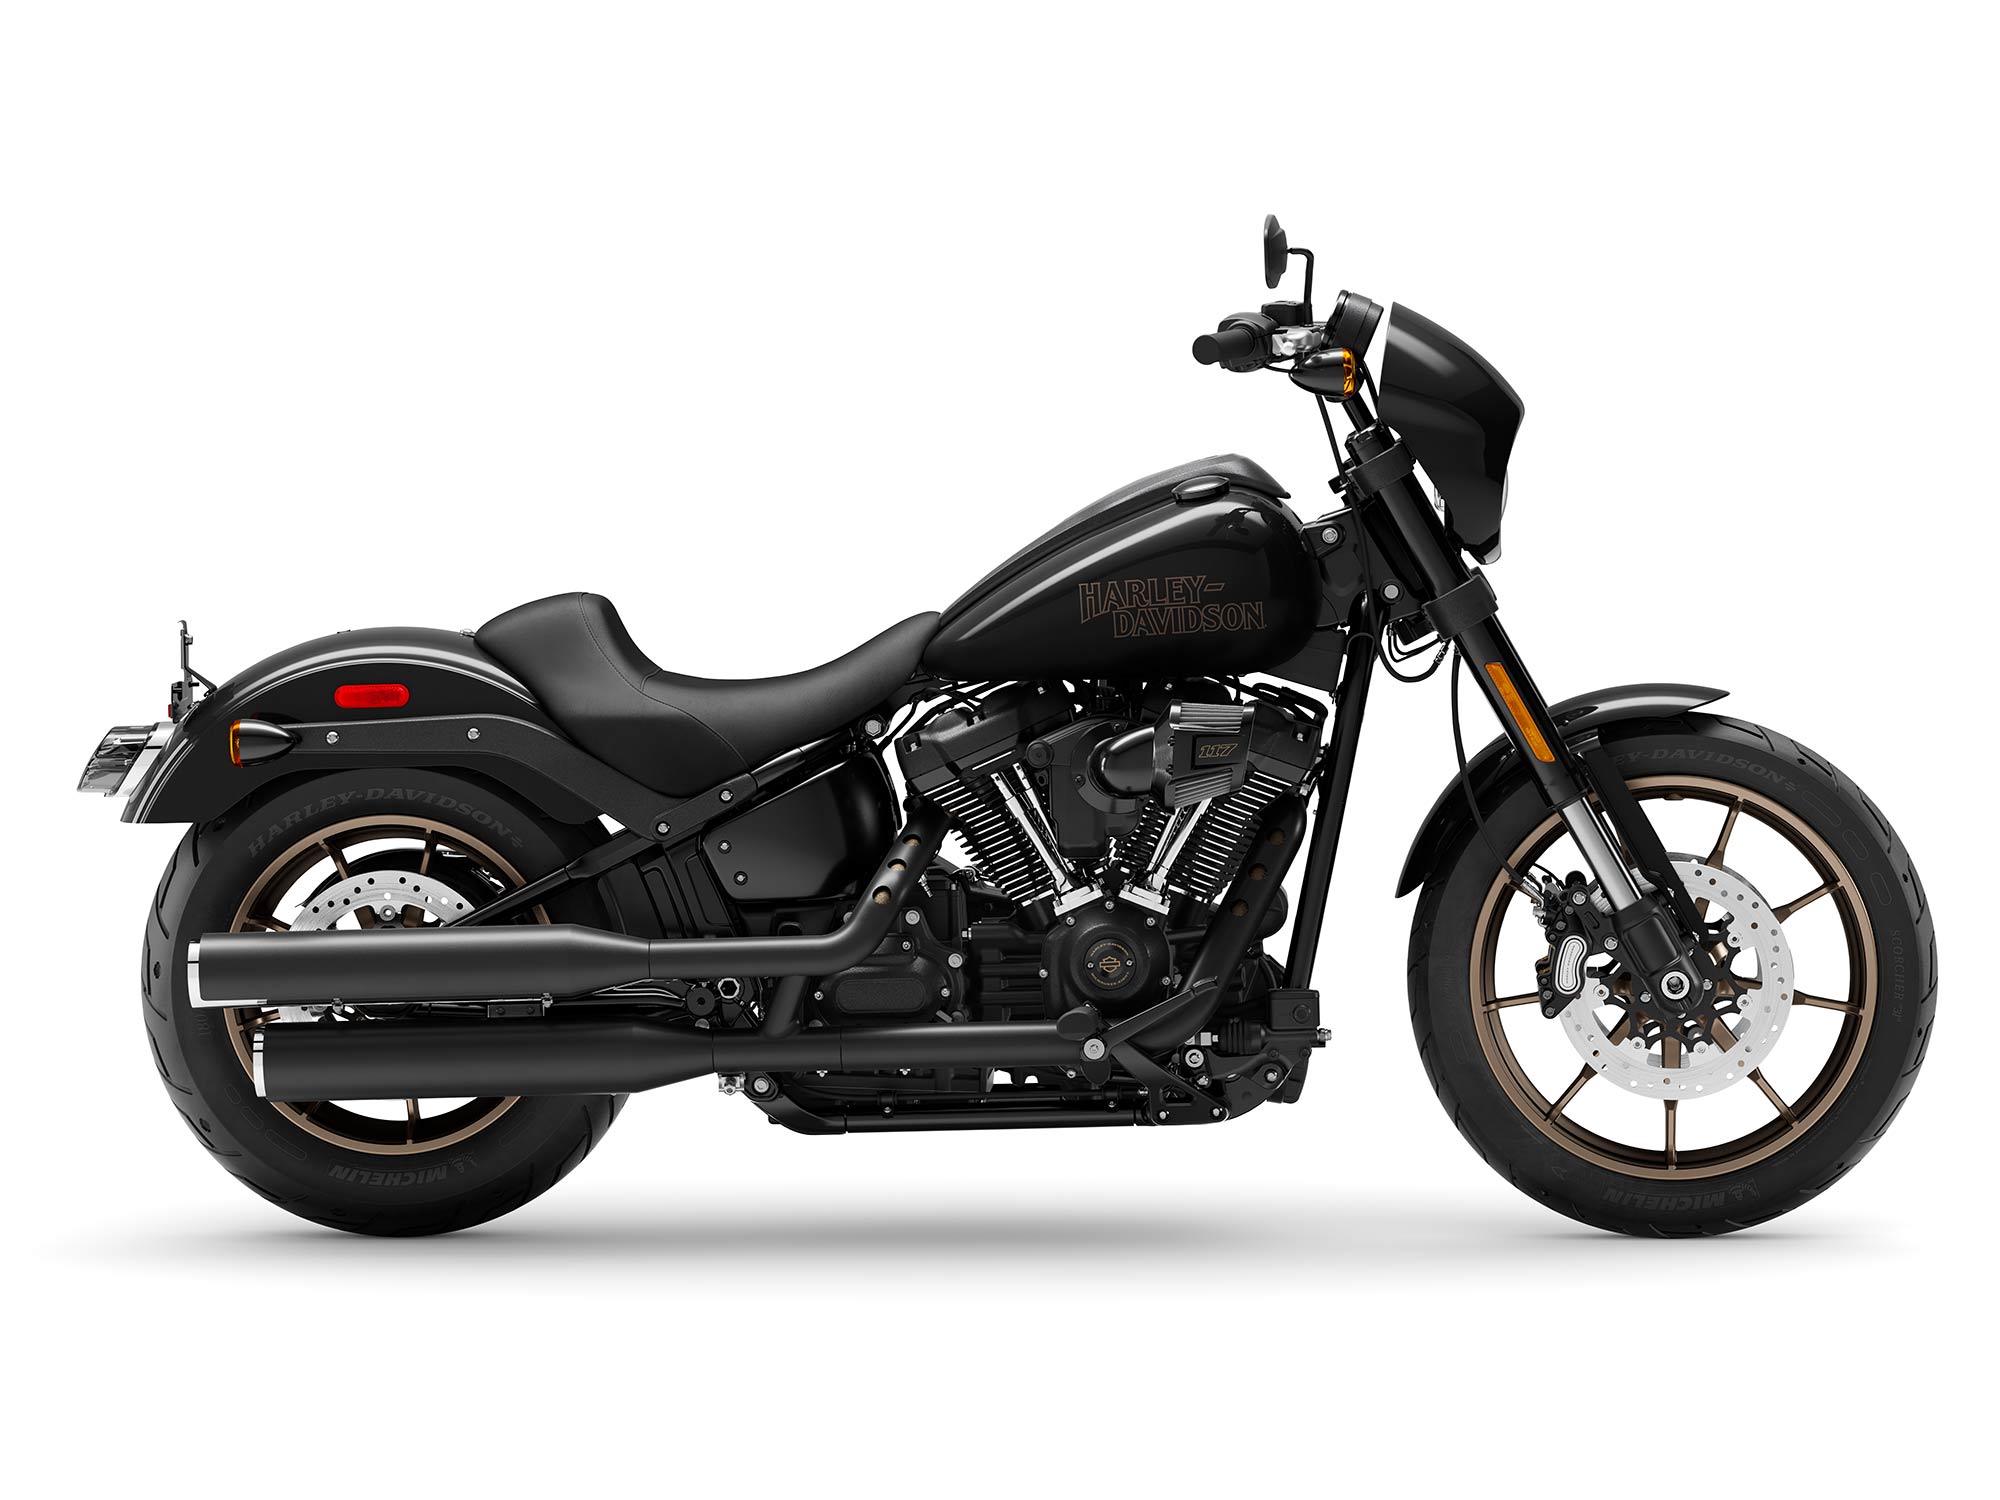 2022 Harley-Davidson motorcycles include heated seats, other features